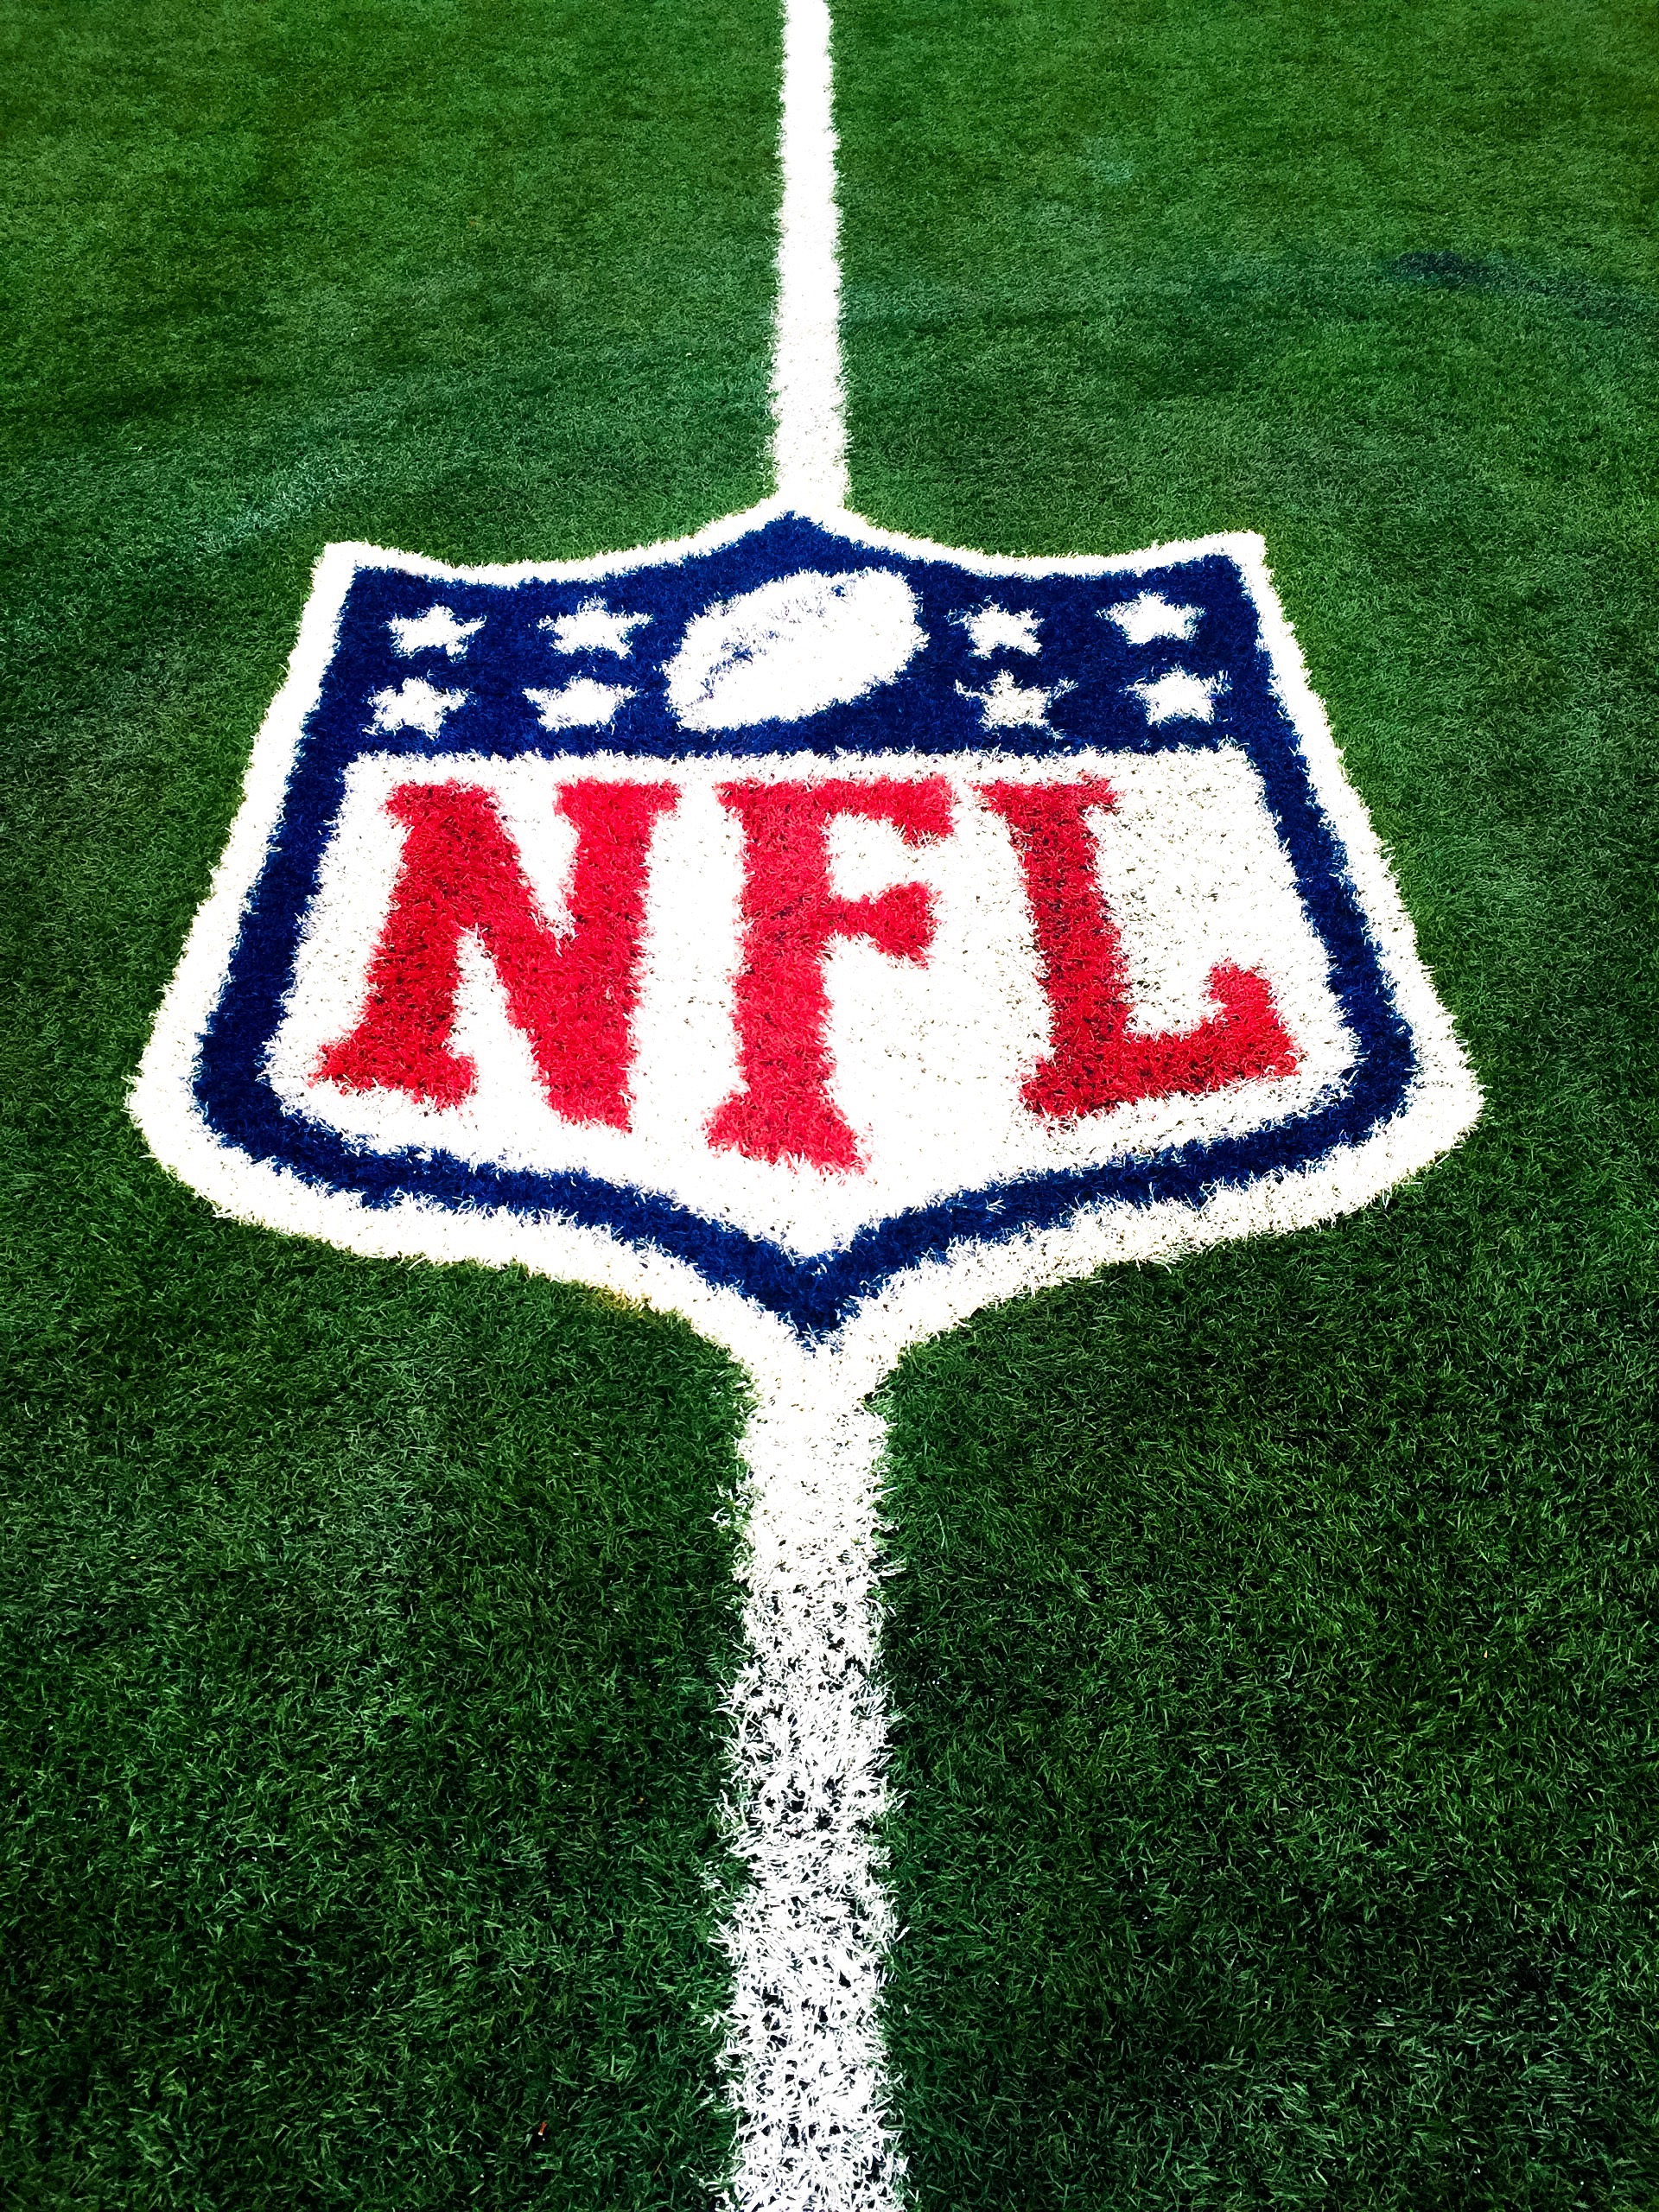 Turf Nation Proud to Manufacture Playing Surface for Super Bowl LI